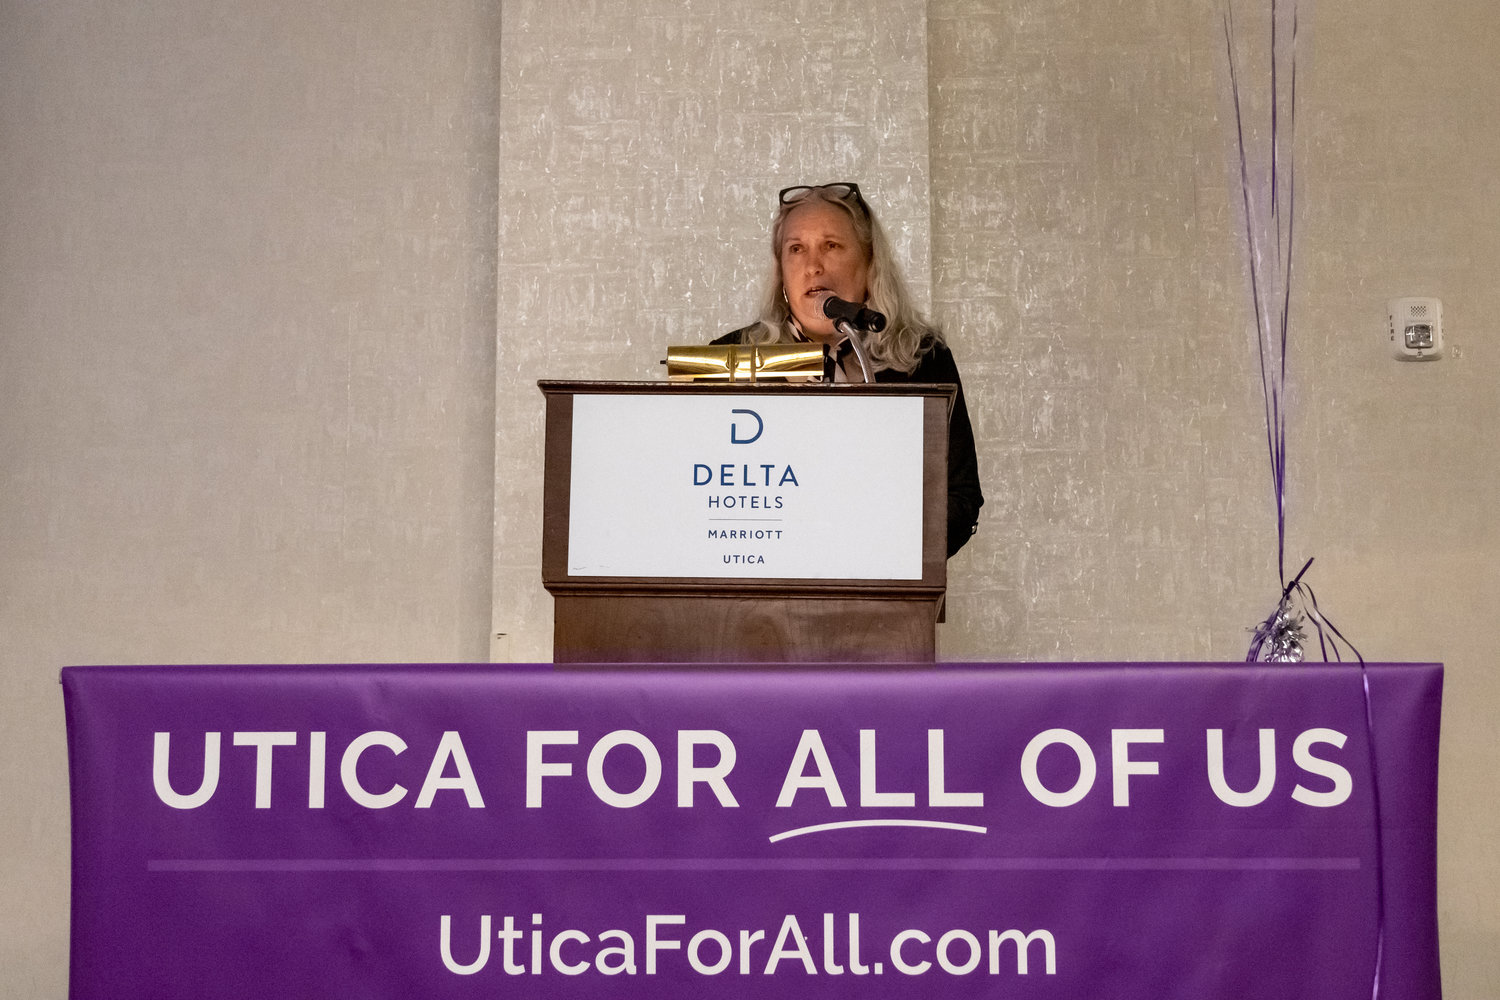 Third District Councilor Celeste Friend announced her candidacy for mayor of Utica on Saturday, Jan. 7, at the Delta Hotels by Marriott in downtown Utica.